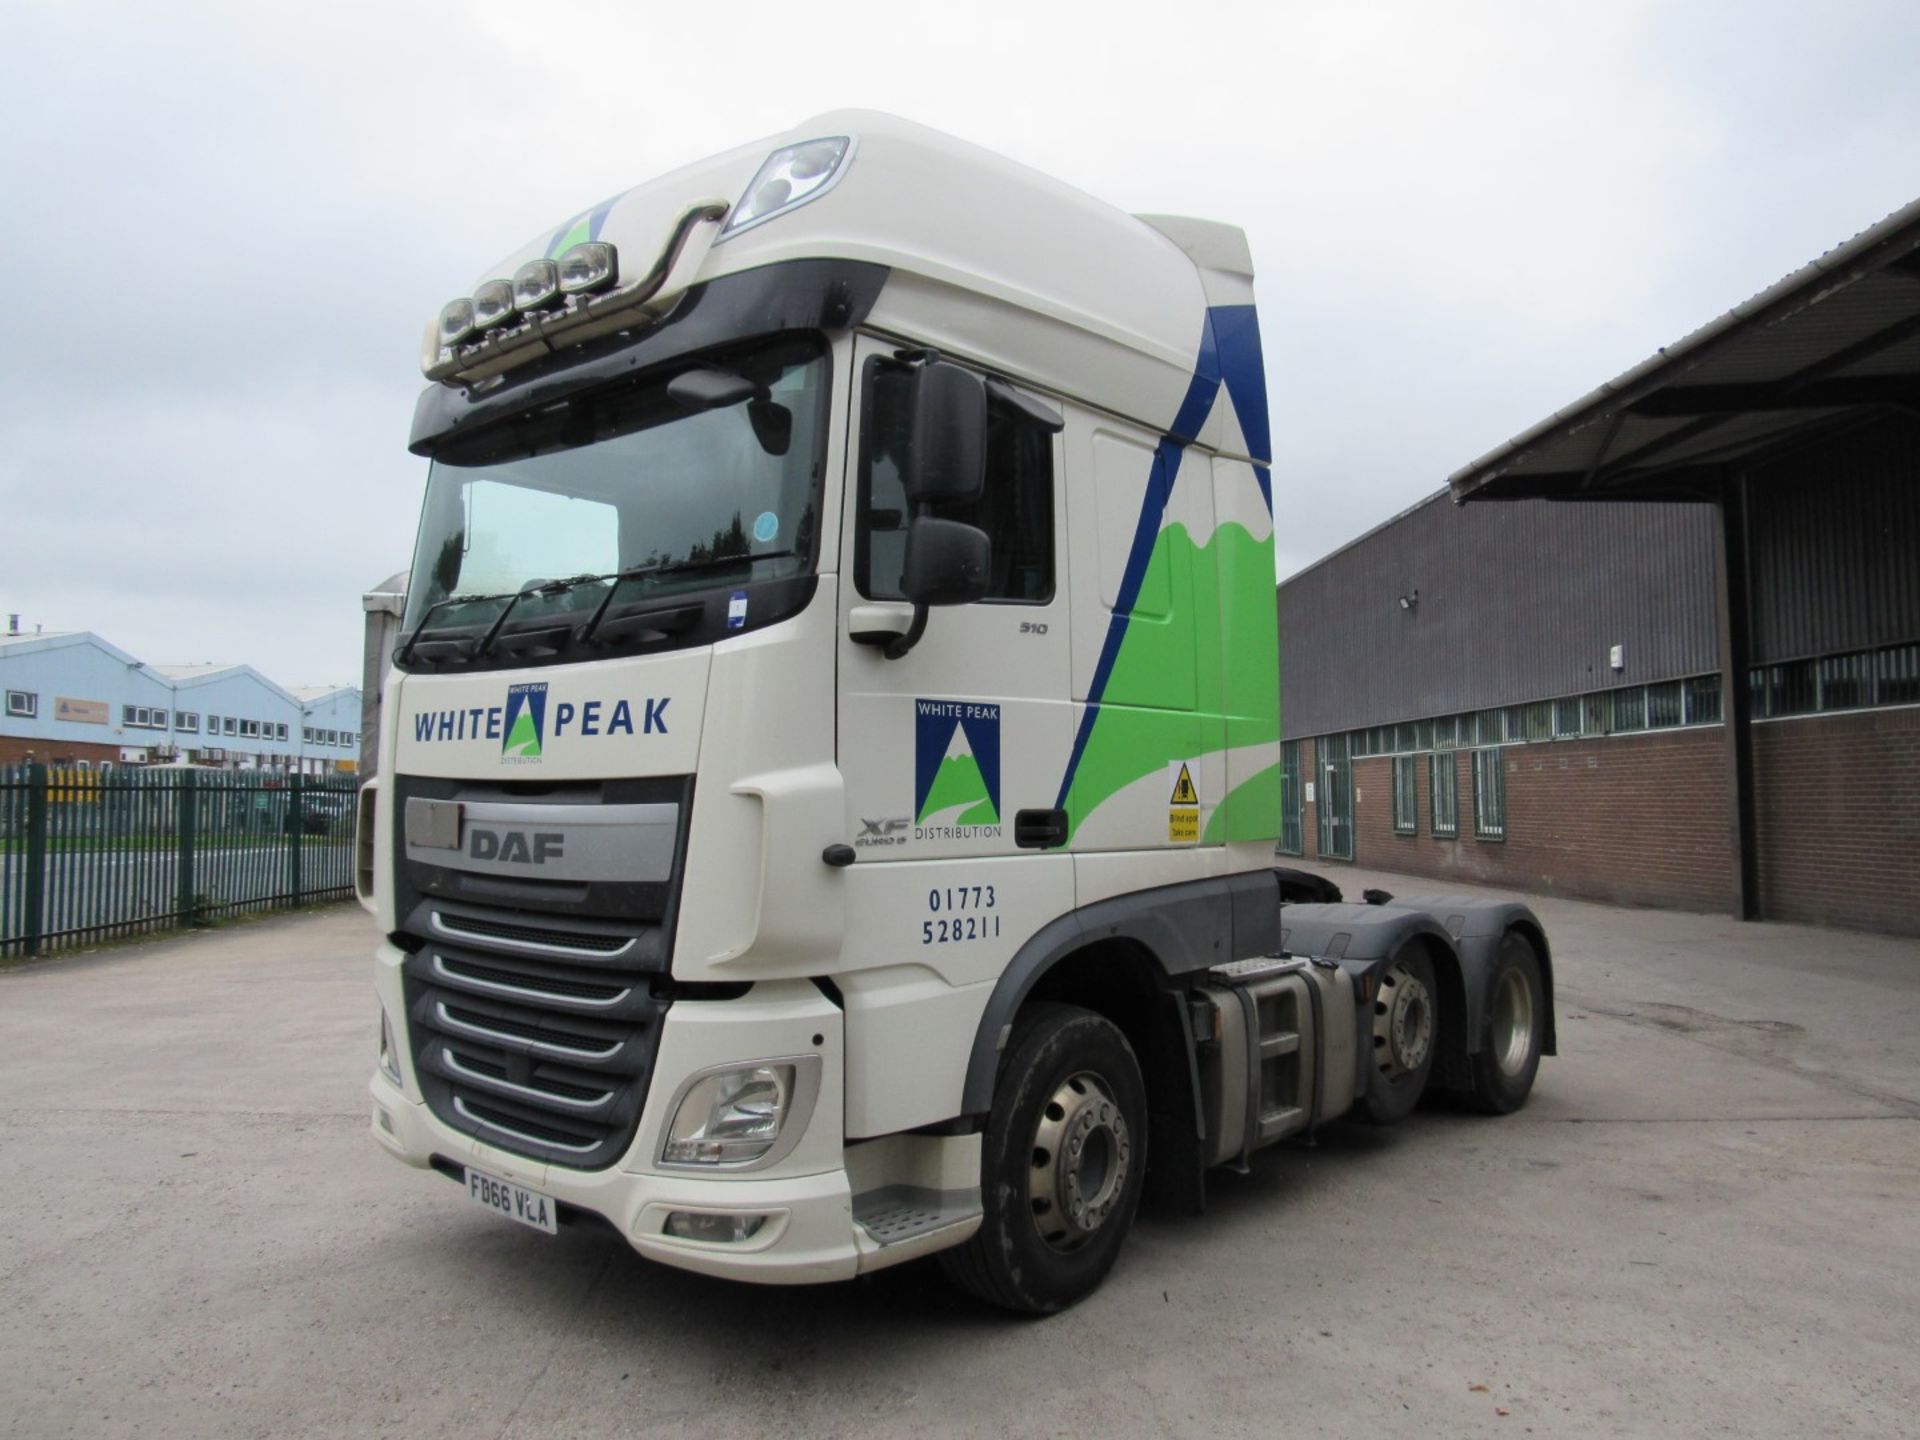 Daf FTG XF:510 6x2 Euro 6 Super space cab tractor - Image 5 of 26